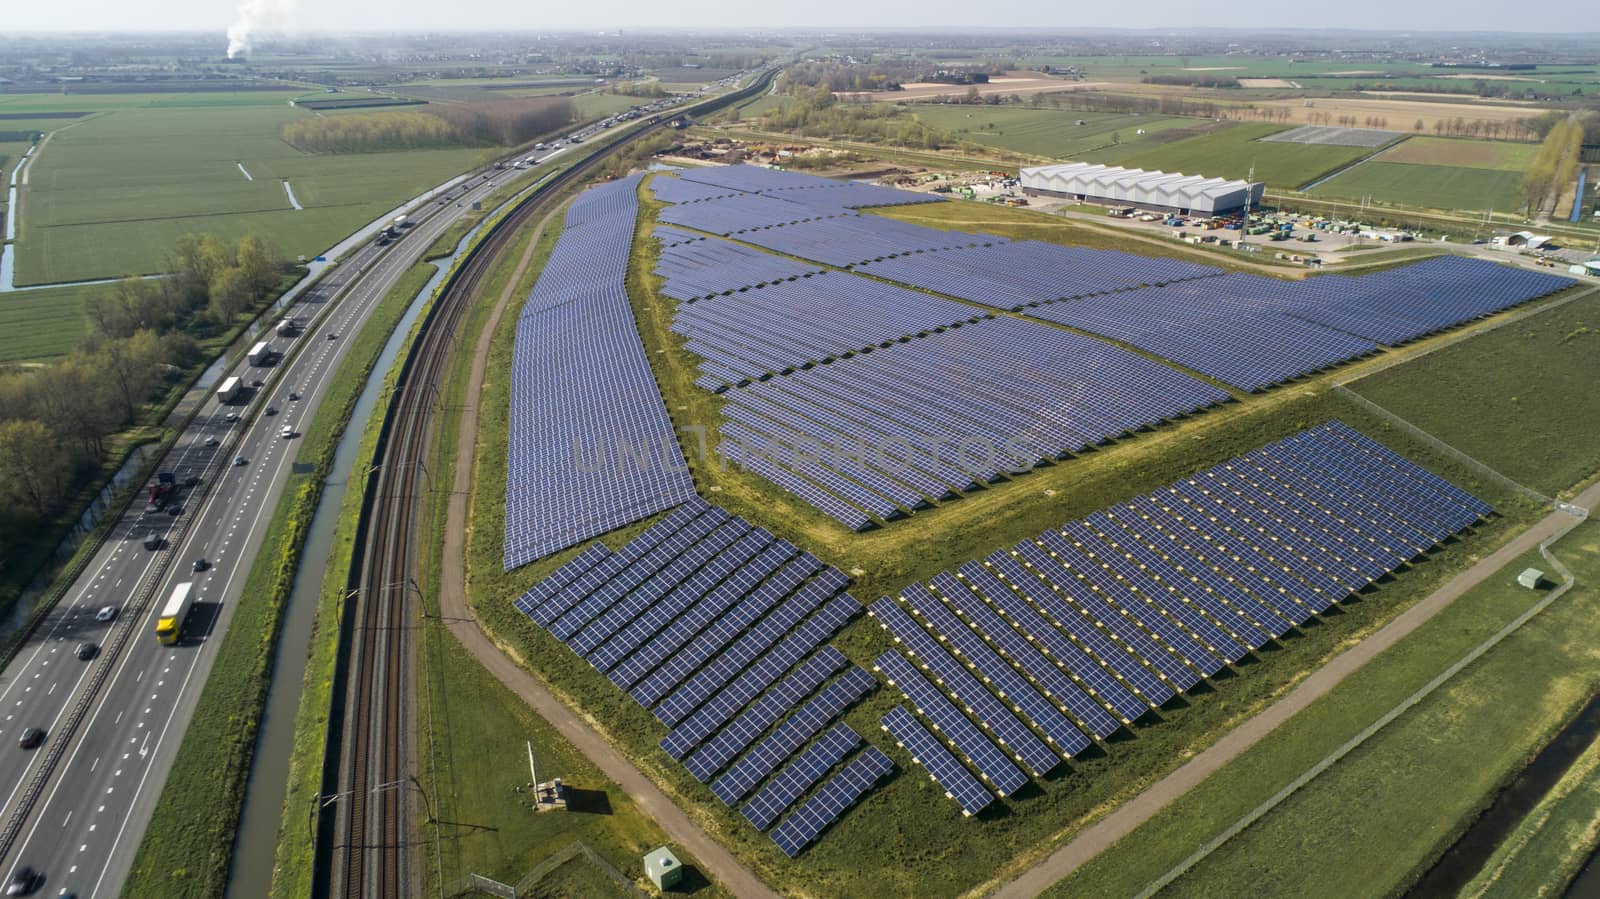 Big Solar panel farm with photovoltaic panels for clean solar en by Tjeerdkruse